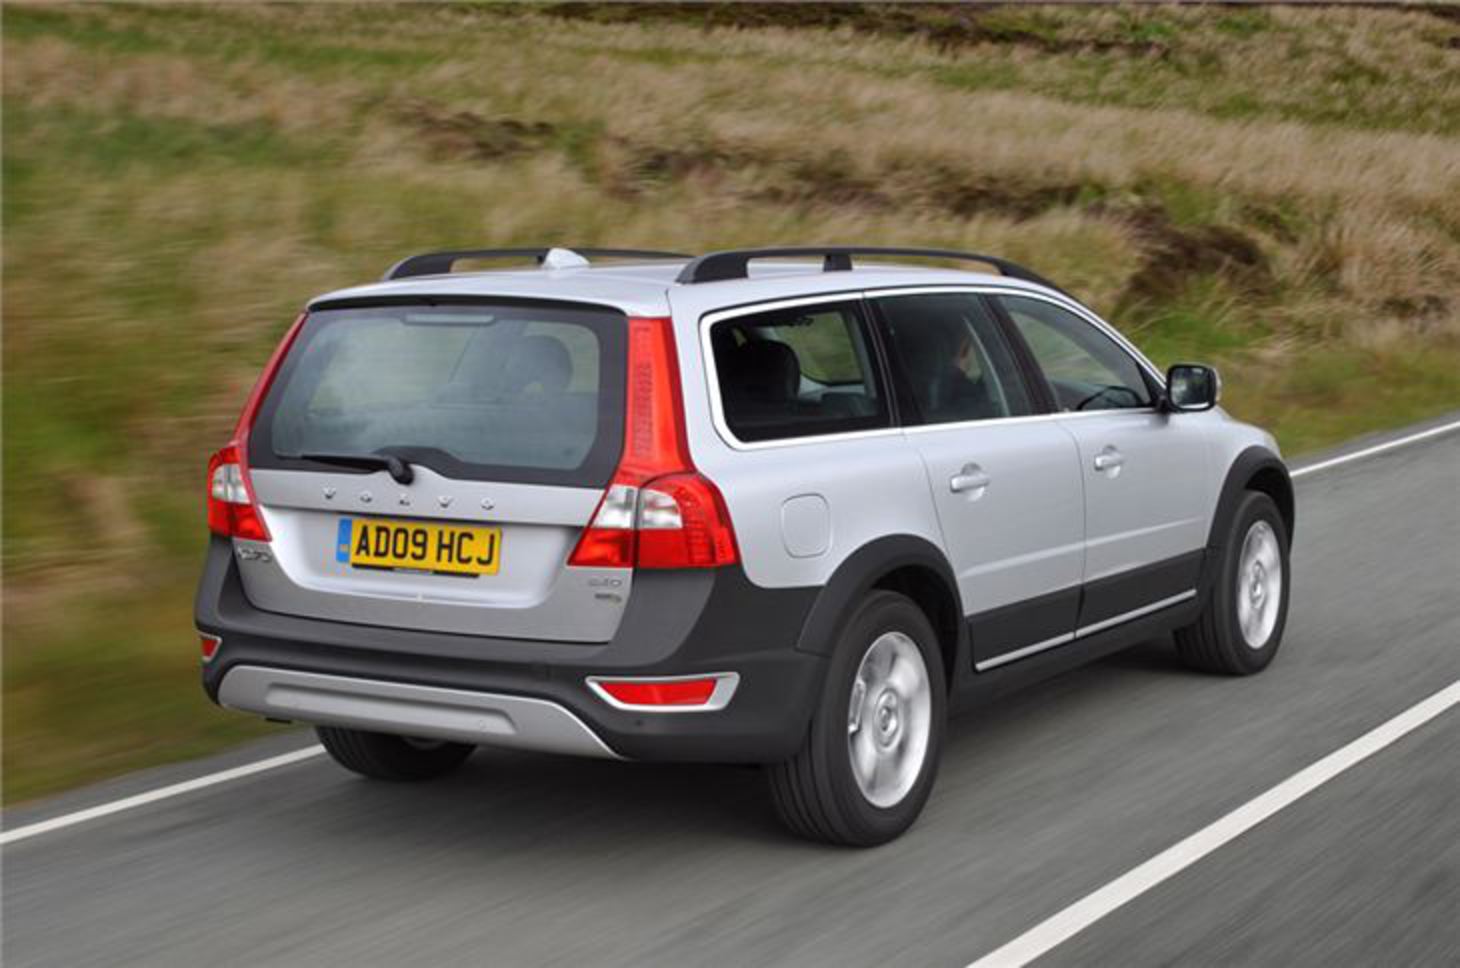 Request a Volvo XC70 test drive. Last updated 4 December 2012